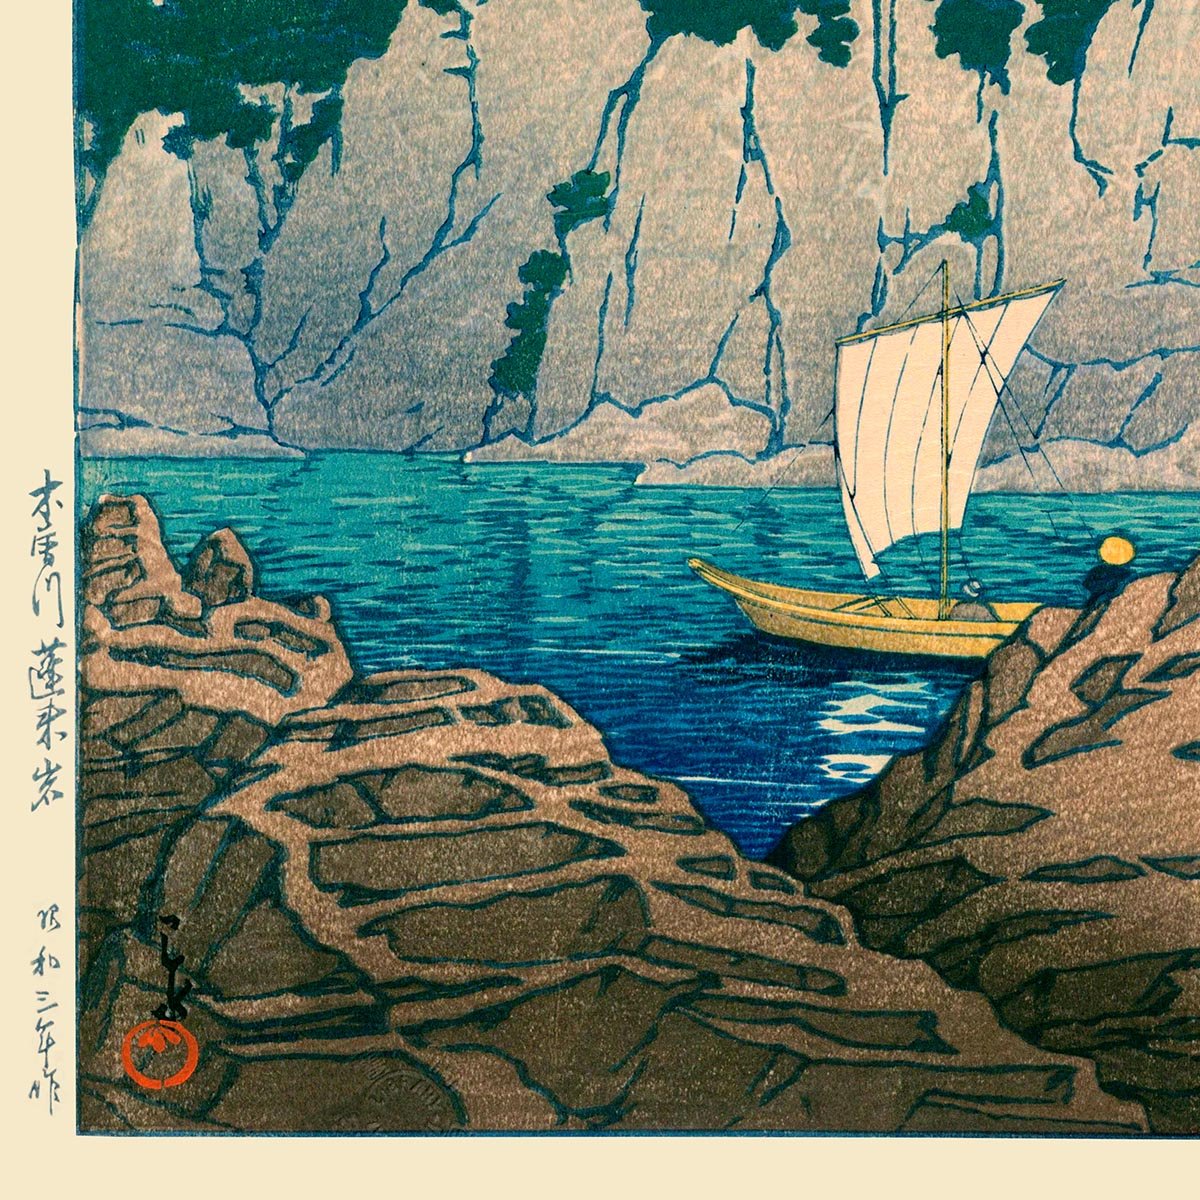 Rocks on The Kiso River by Hasui